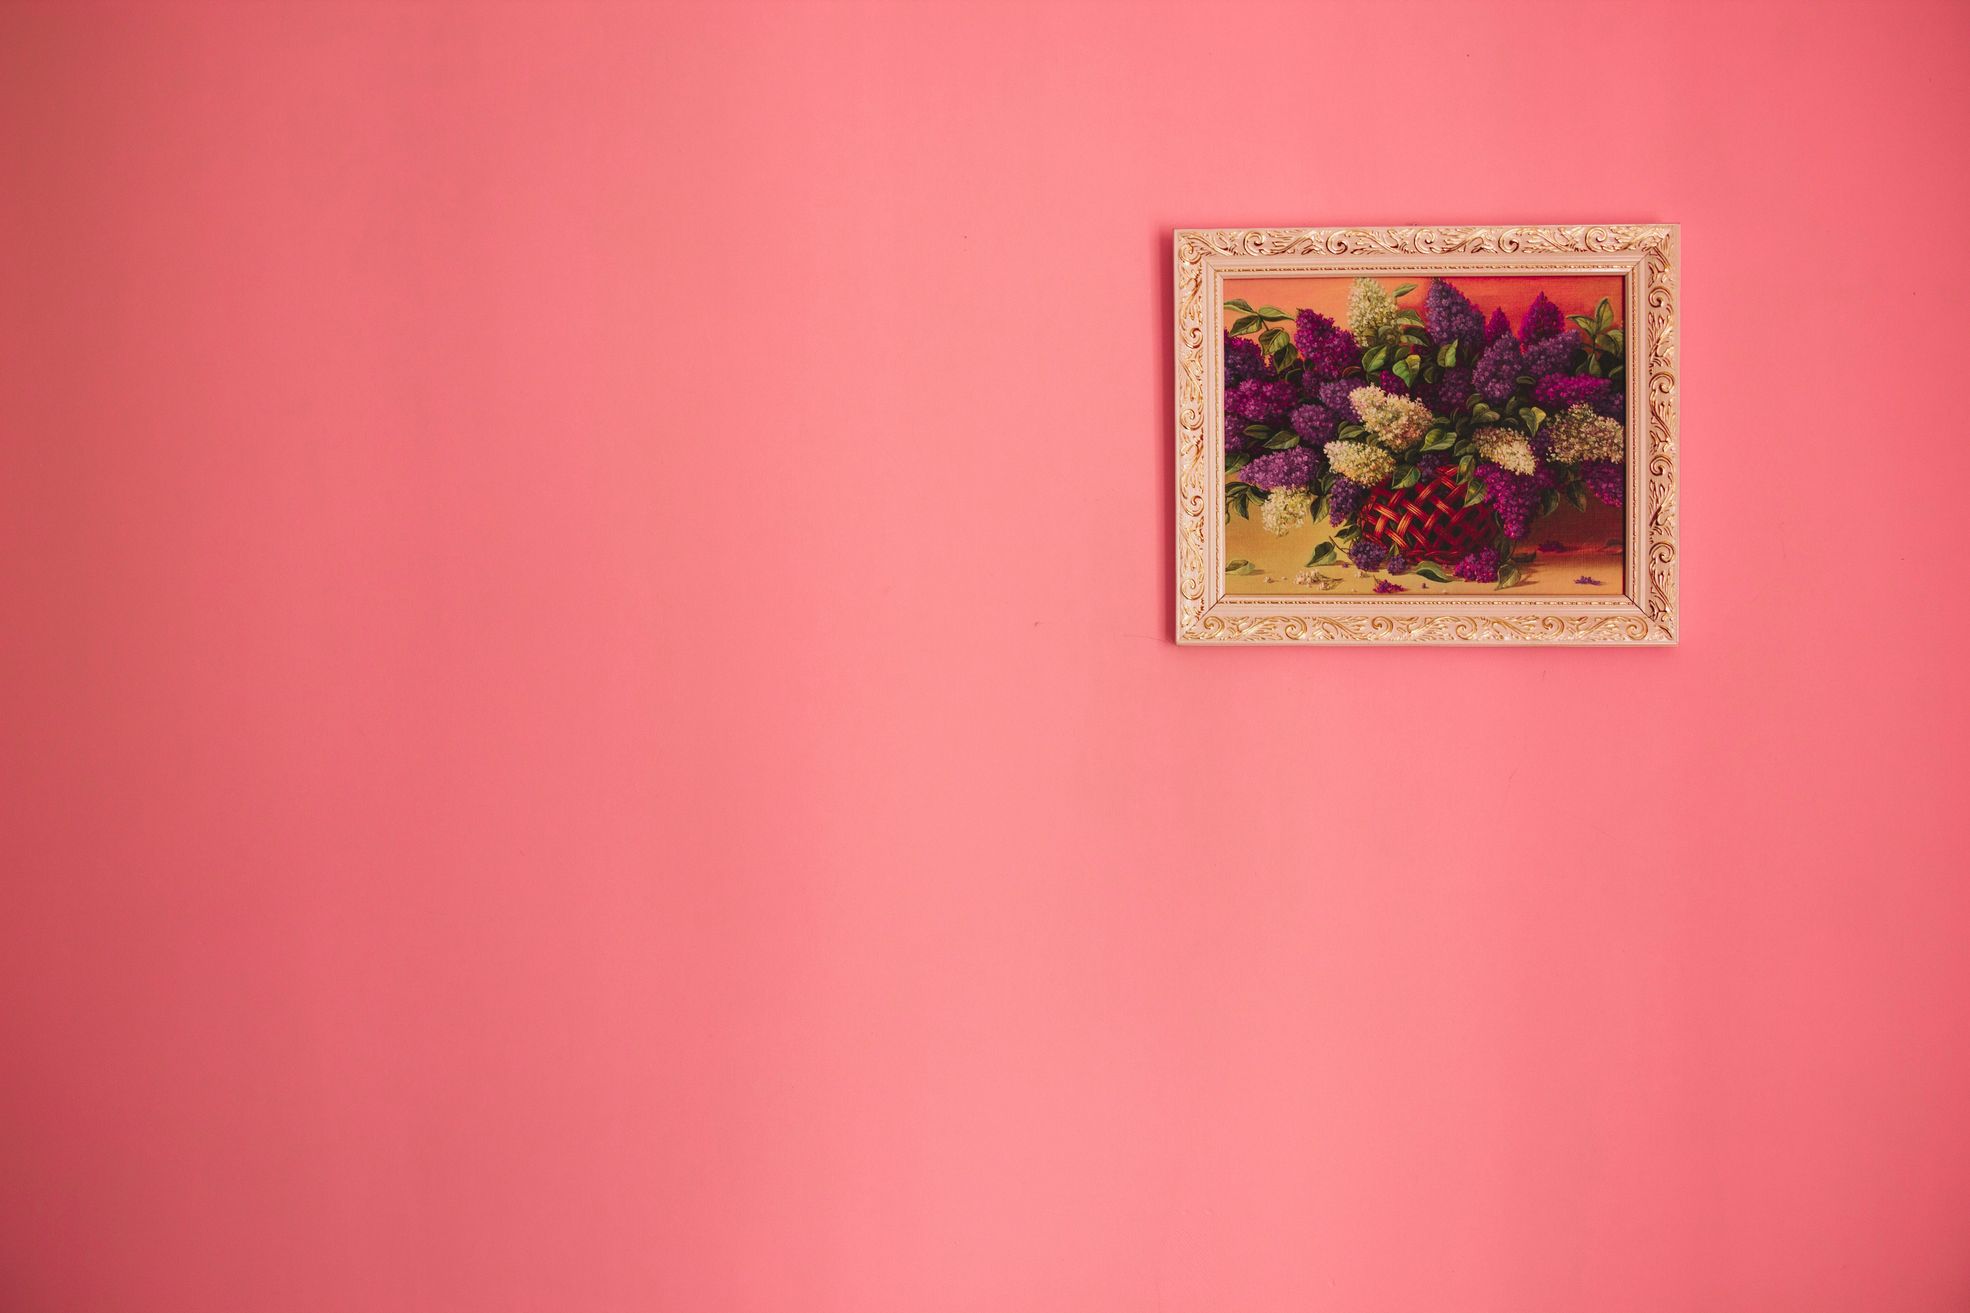 framed flower picture on a pink wall